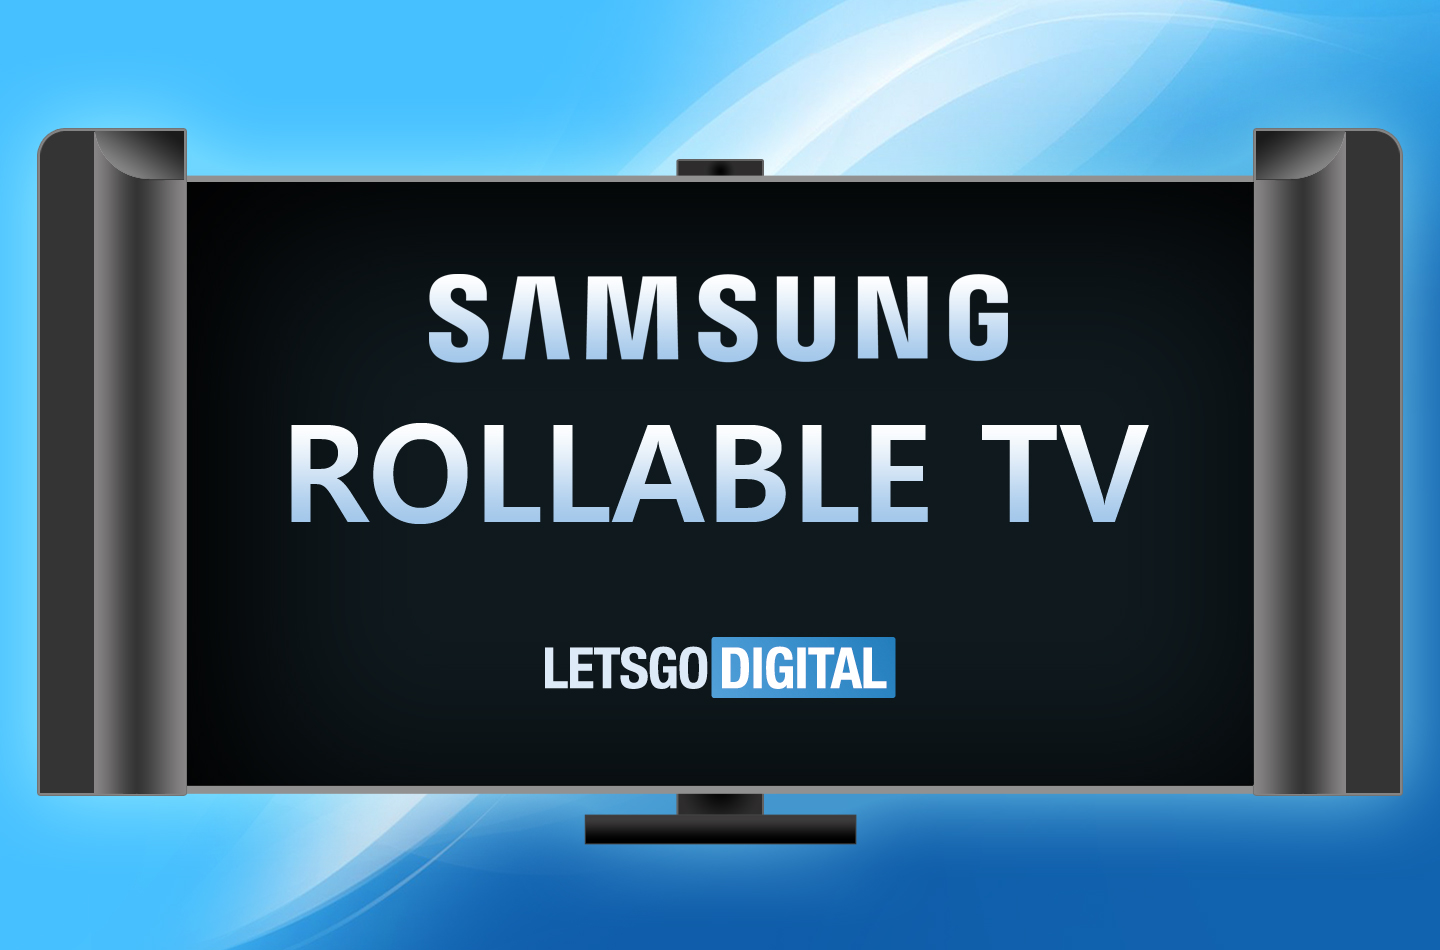 Samsung rollable TV